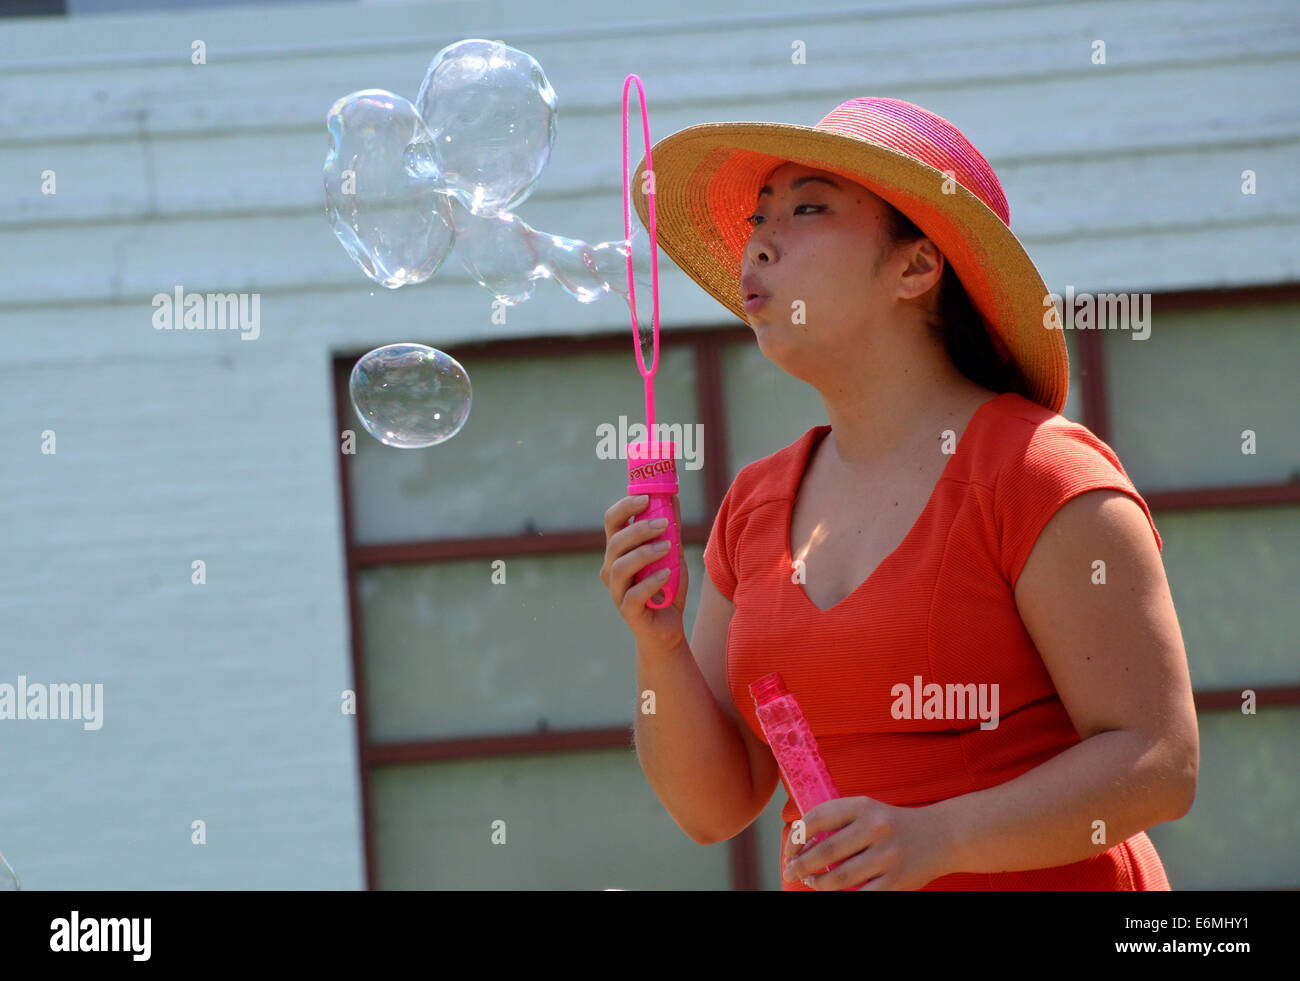 Woman blowing bubbles Stock Photo